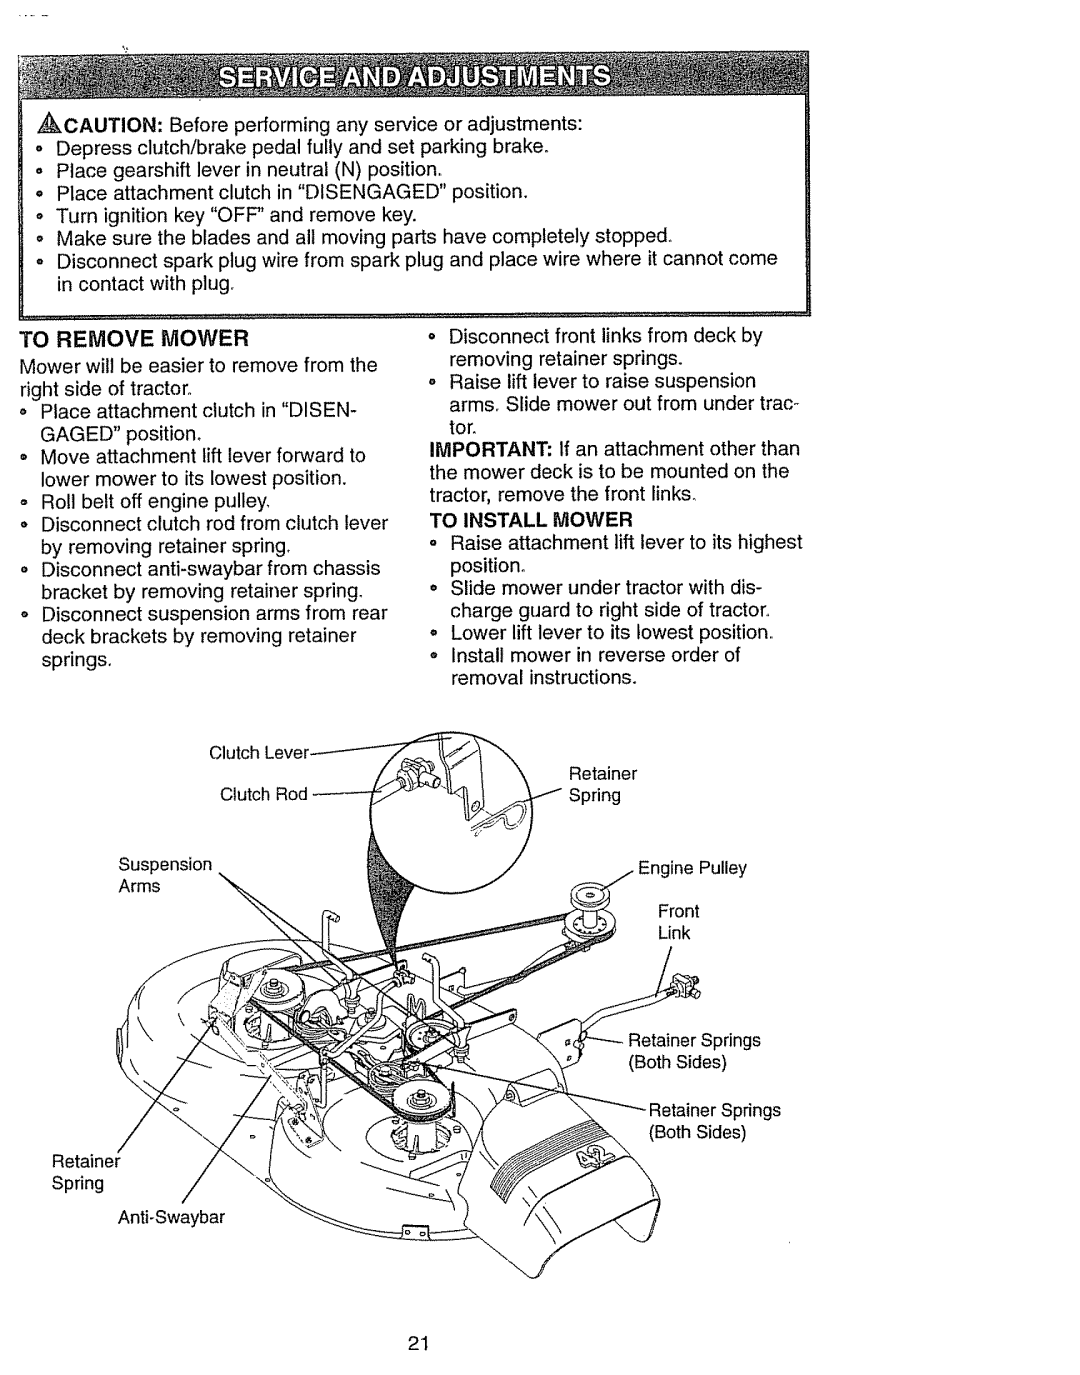 Craftsman 917.270631 owner manual To Remove Mower, To Install Mower 